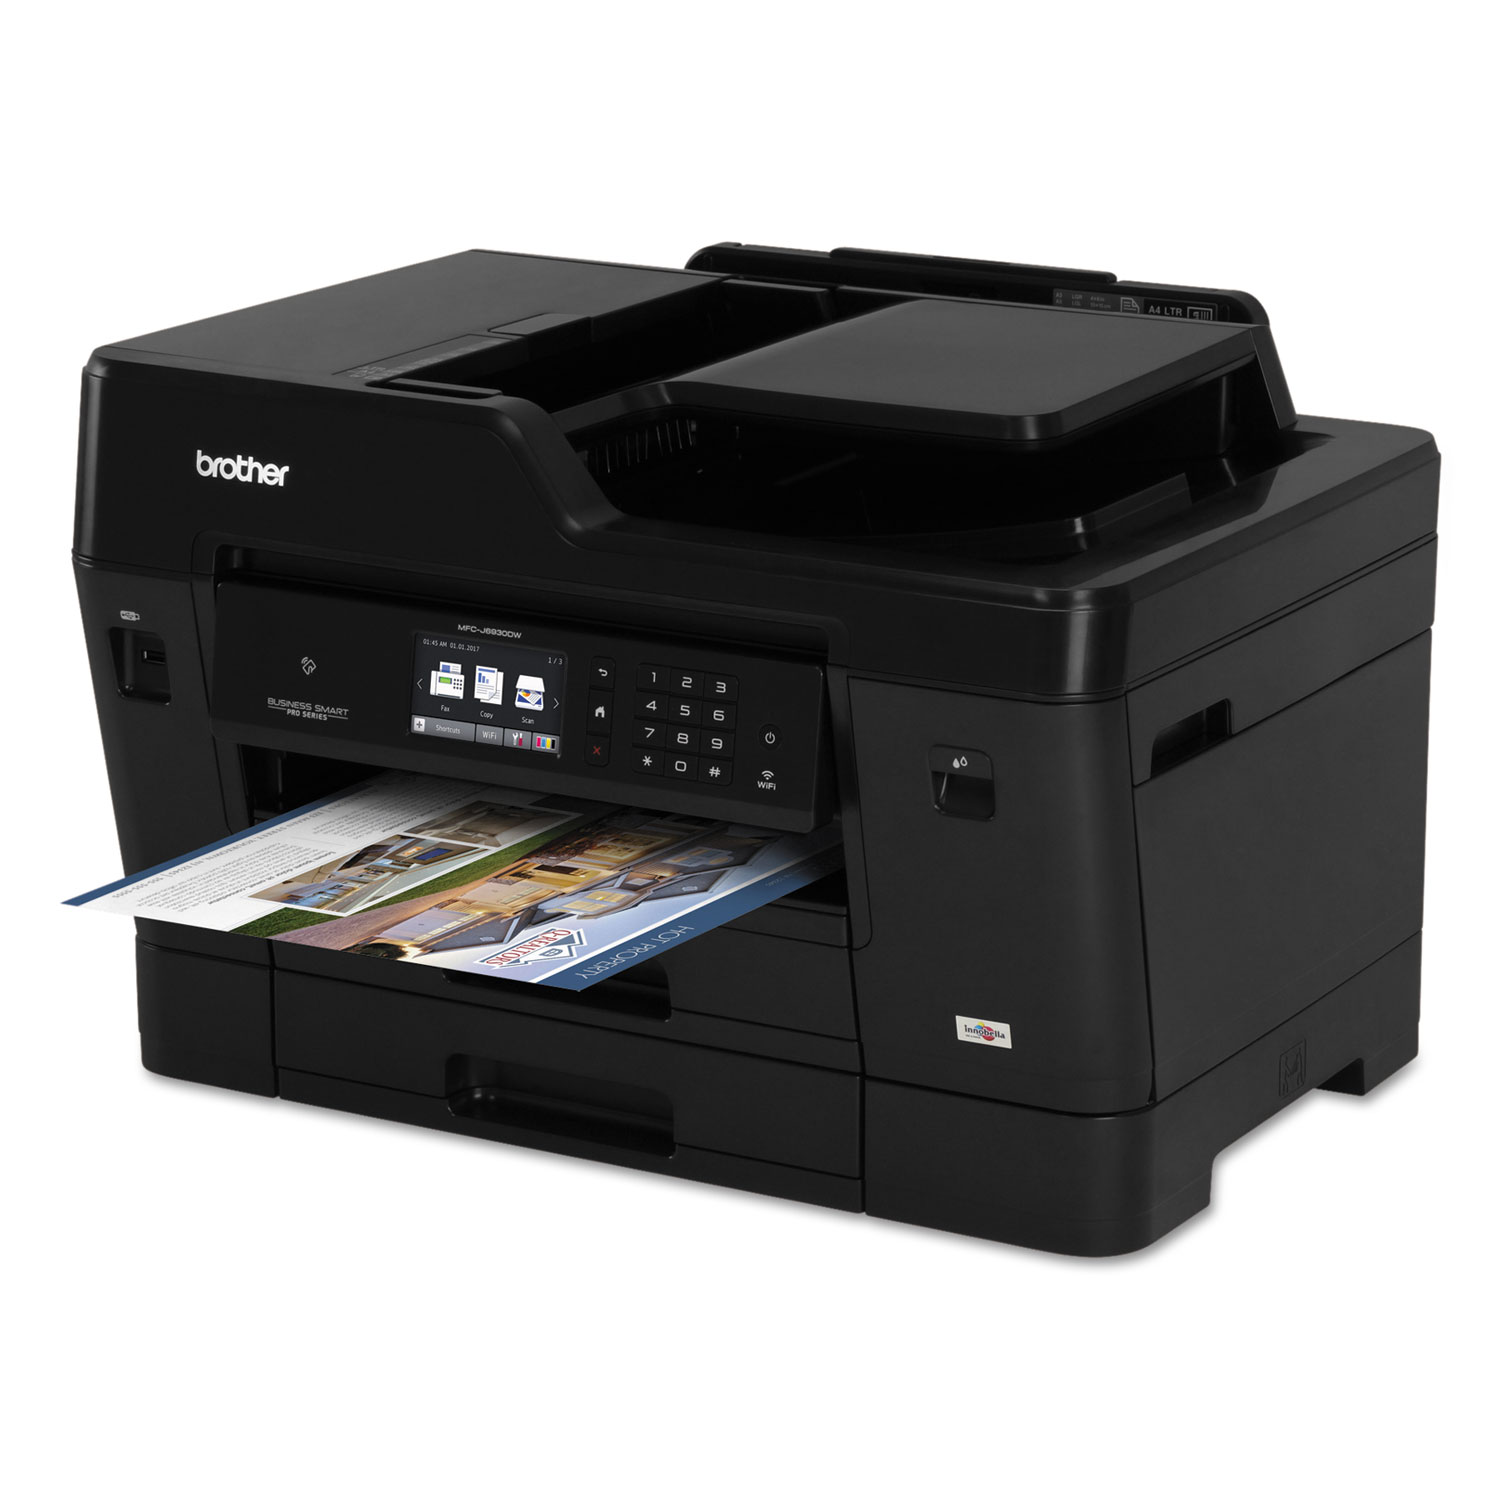 Business Smart Pro MFC-J6930DW Color All-in-One, Copy/Fax/Print/Scan